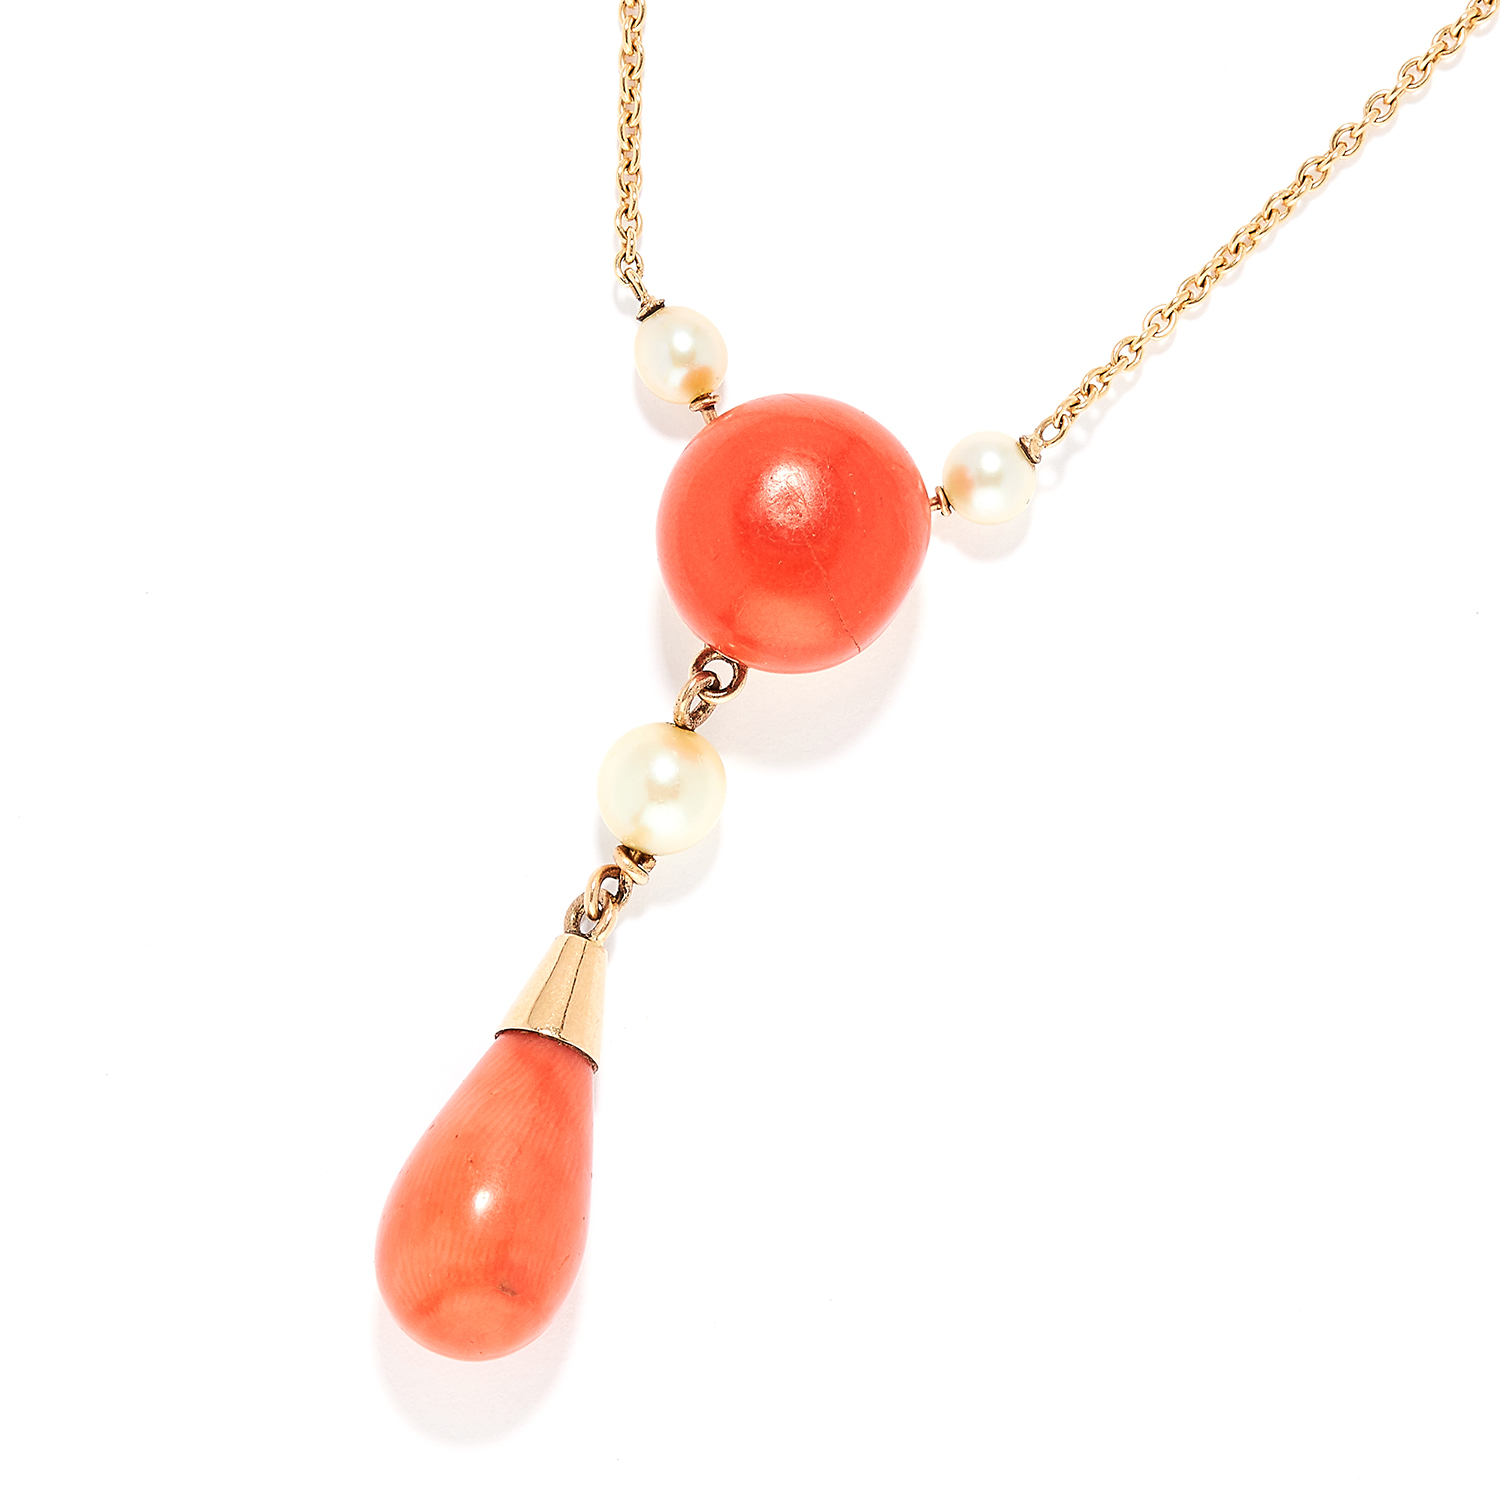 ANTIQUE CORAL AND PEARL NECKLACE in yellow gold, the large polished coral beads accented by